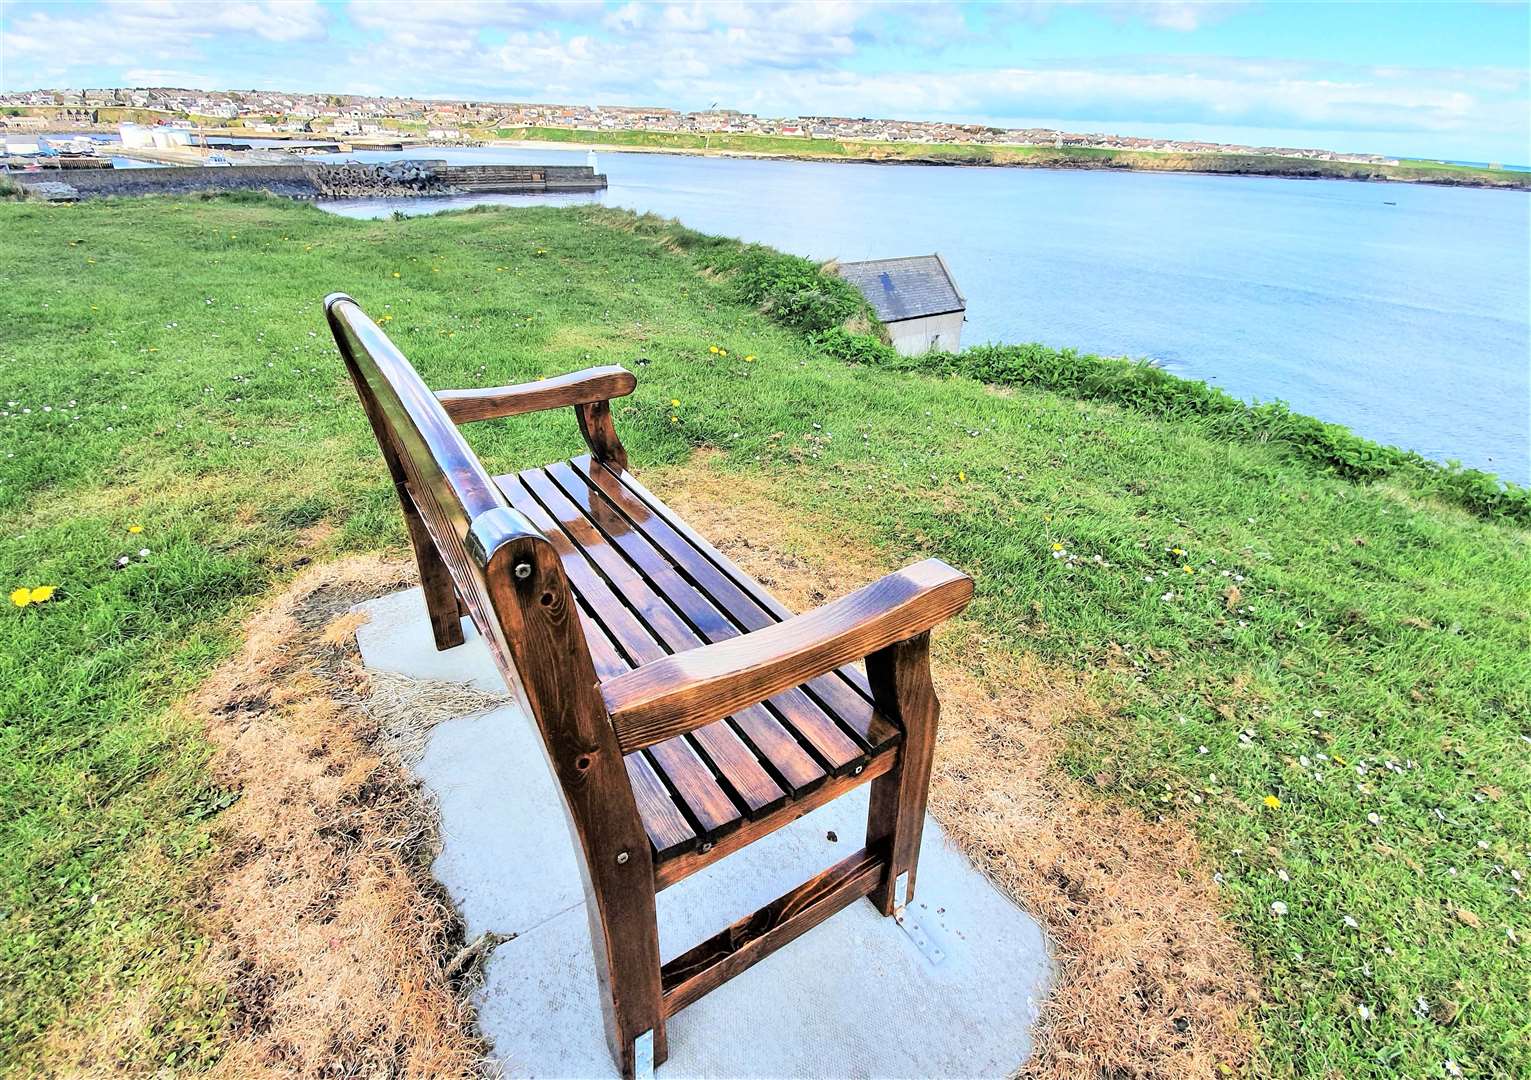 The view over scenic Wick Bay from the bench on the South Head.